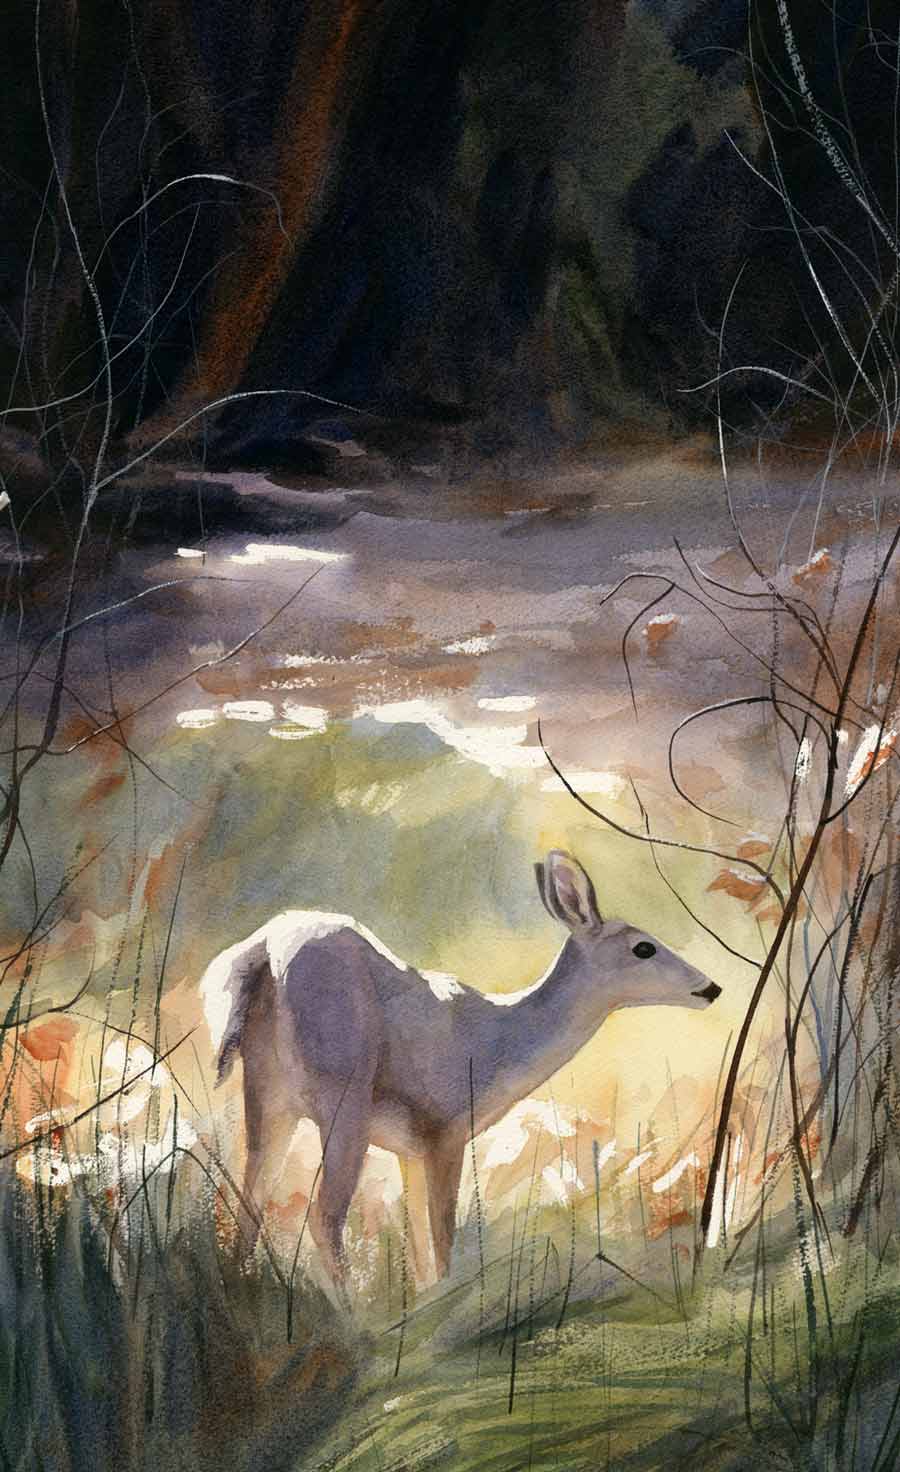 Large portrait-style watercolor painting of a white-tail doe standing in sunlight among foliage and bare branches with a dark background